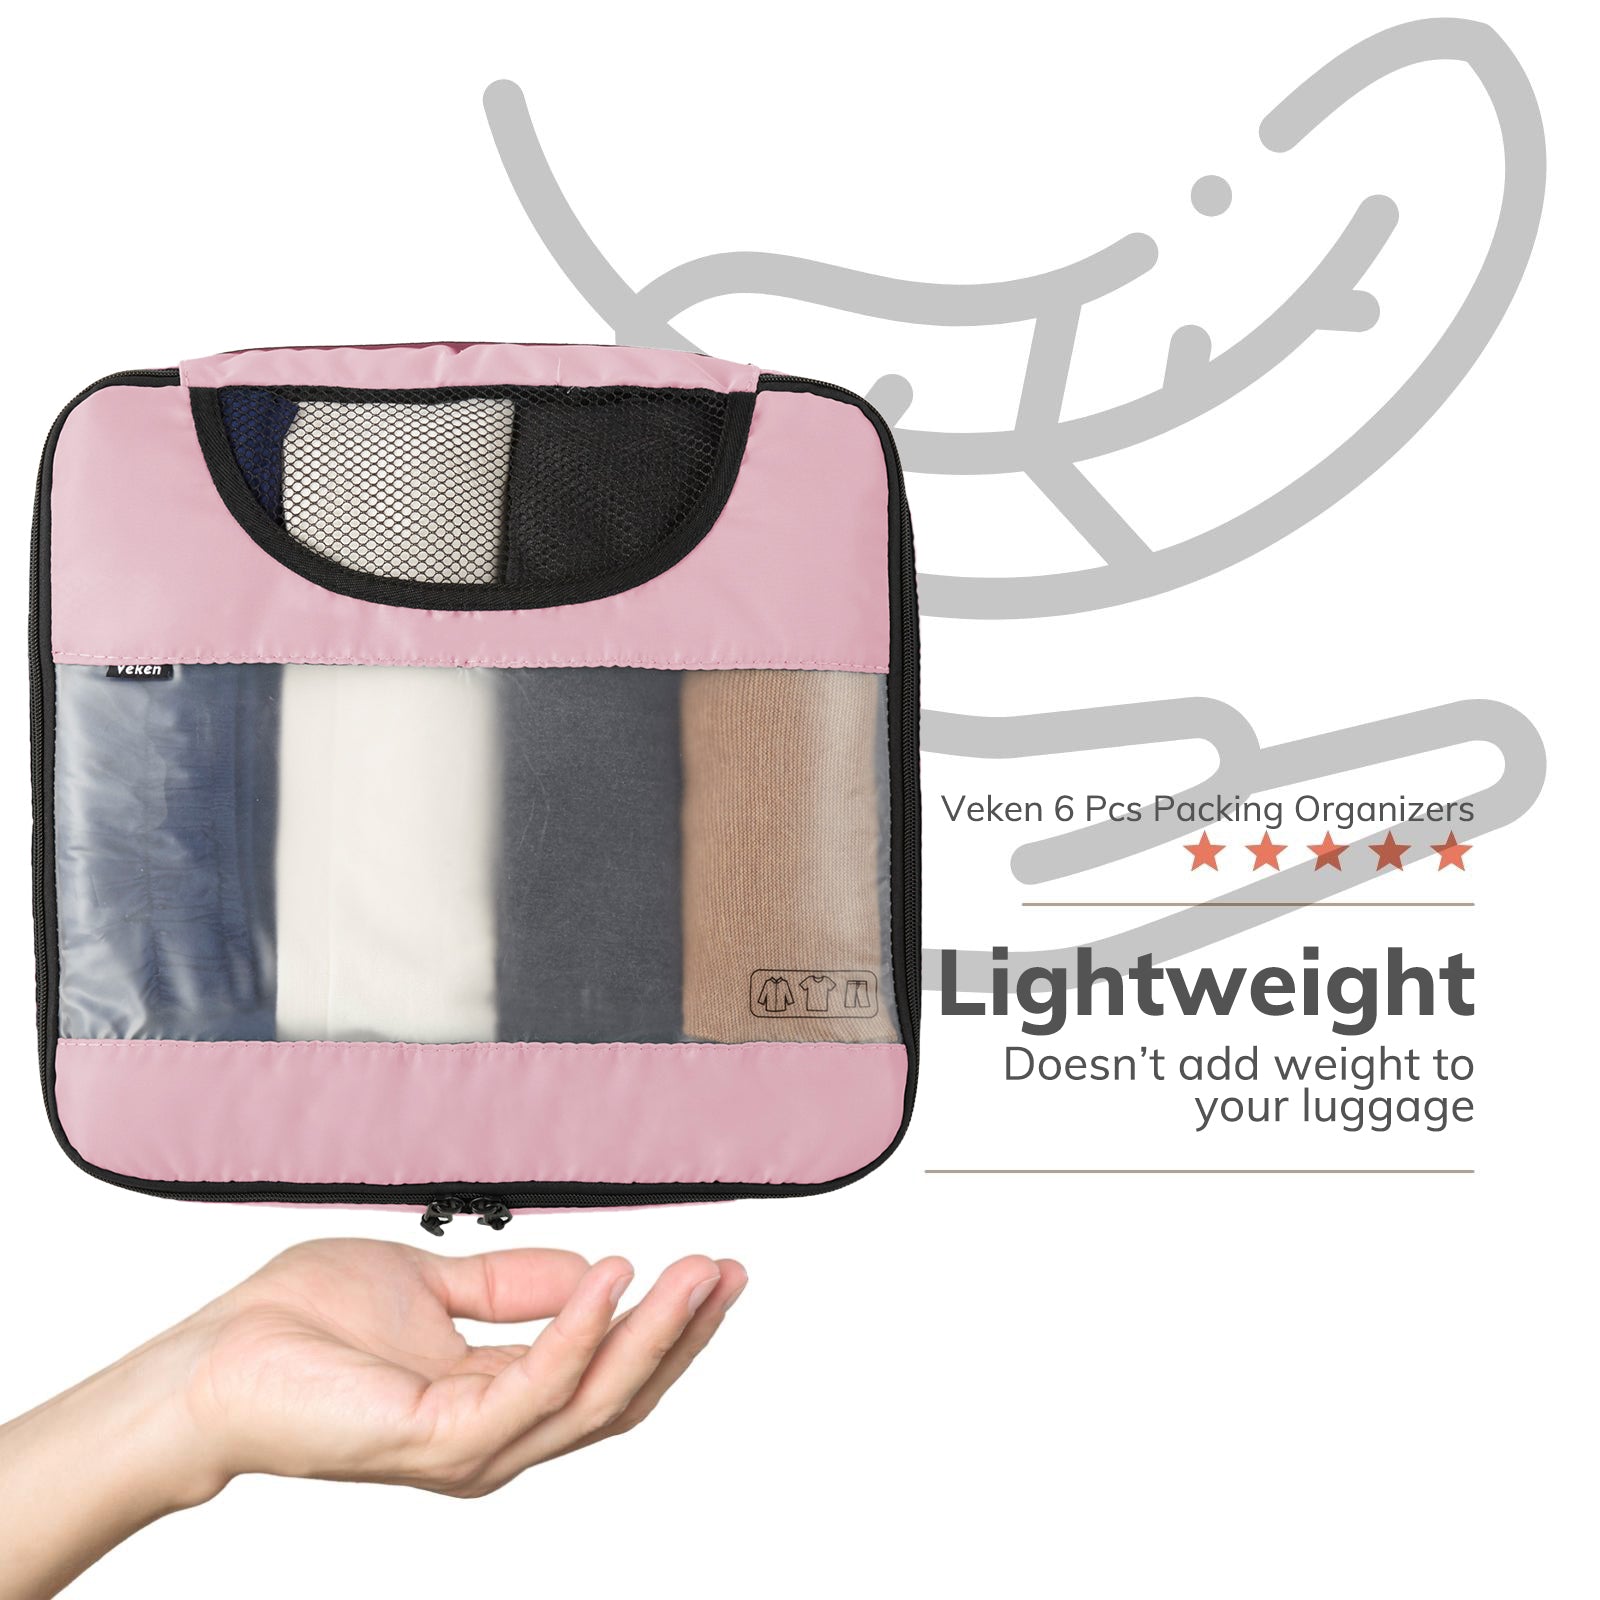 Packing Cubes | 6 Set | Color Pink | Veken - aborderproducts